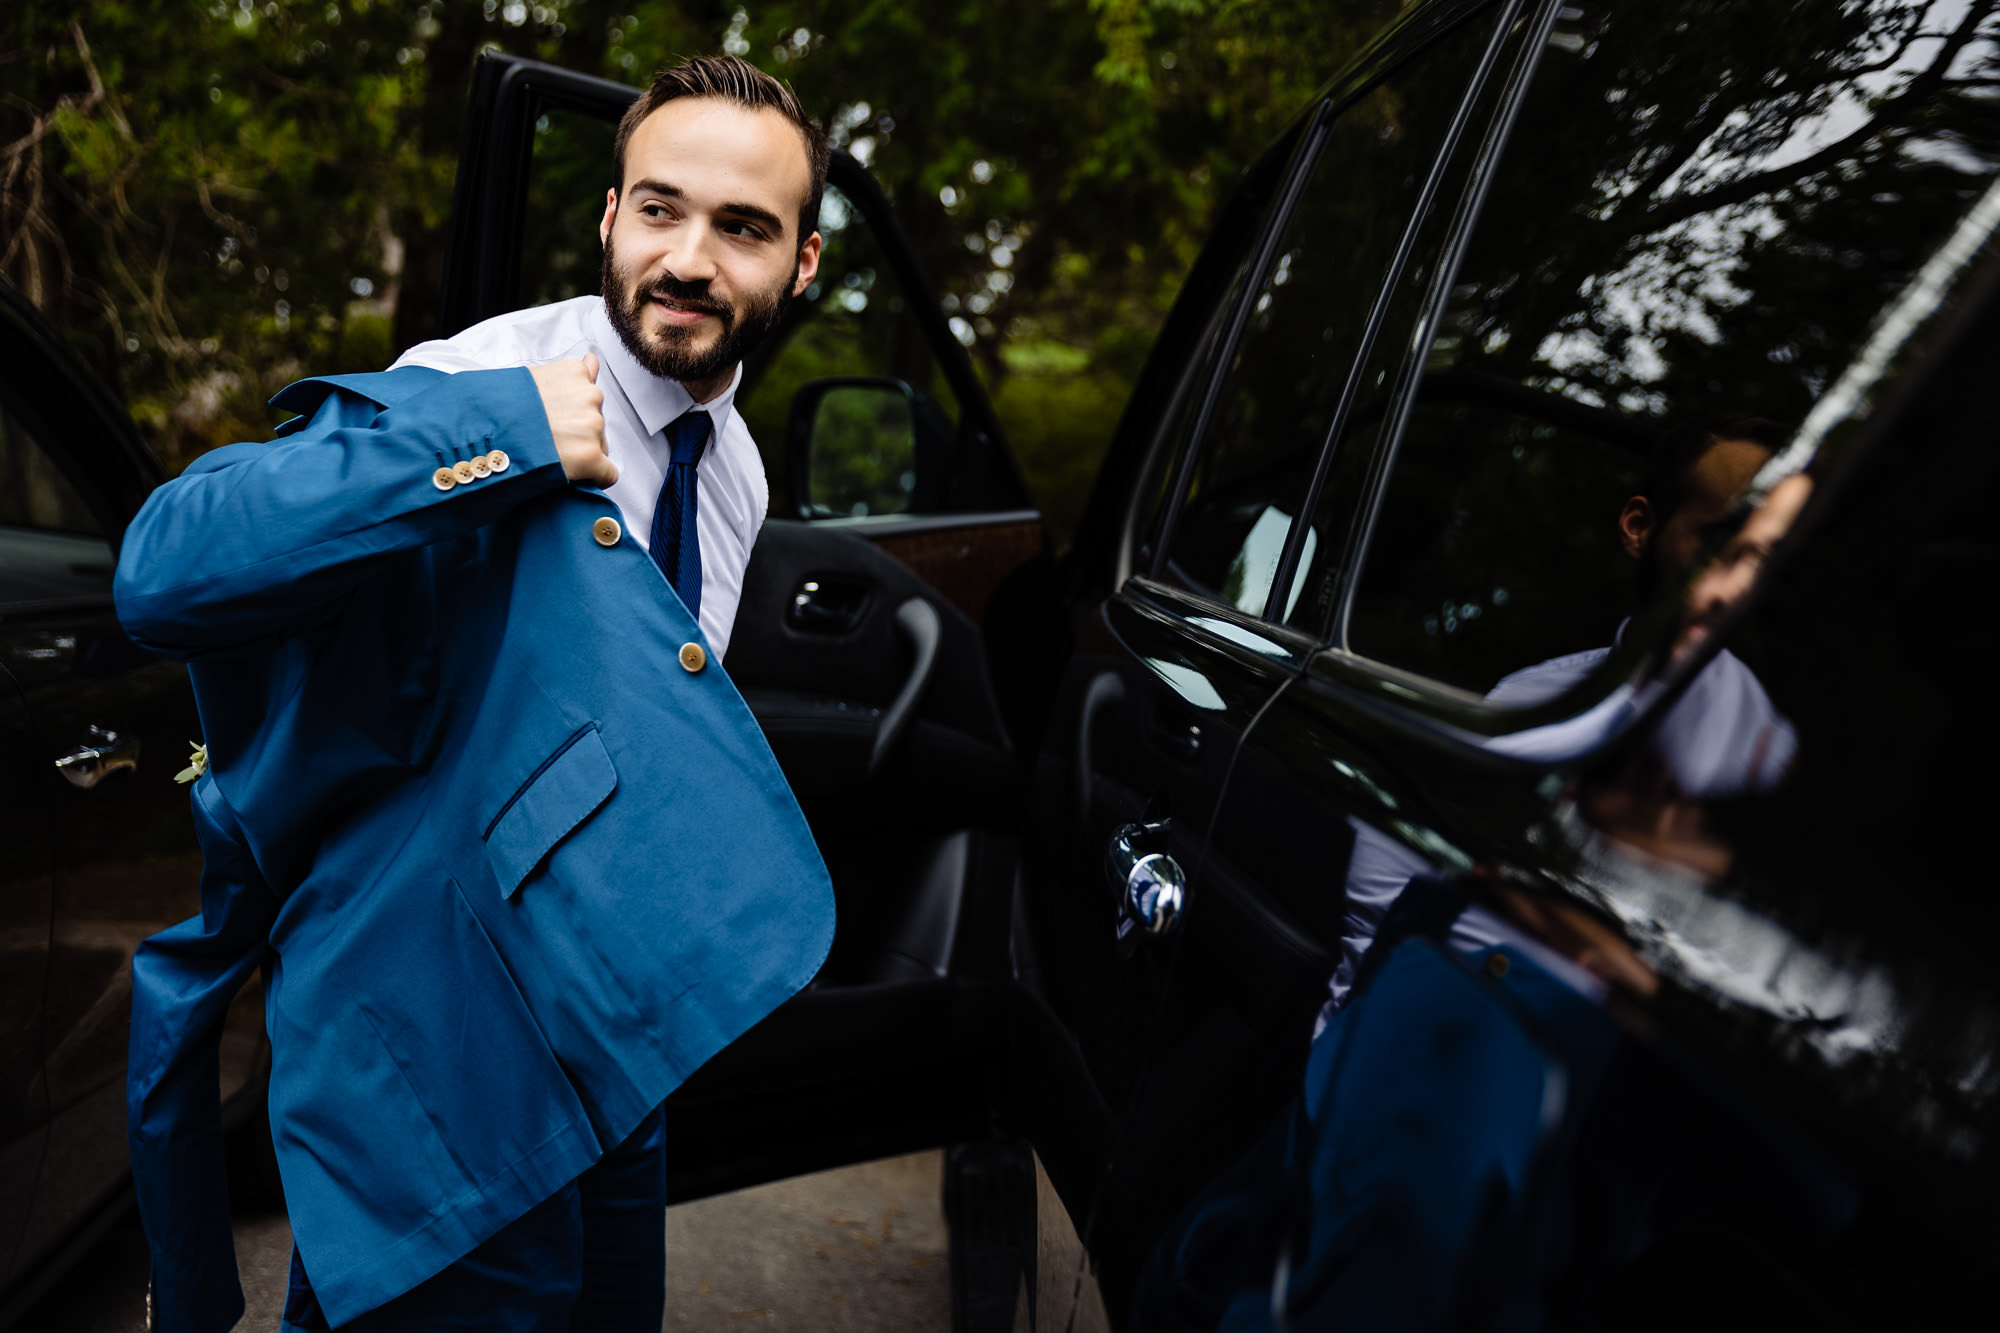 A groom puts on his jacket in an Acadia parking lot